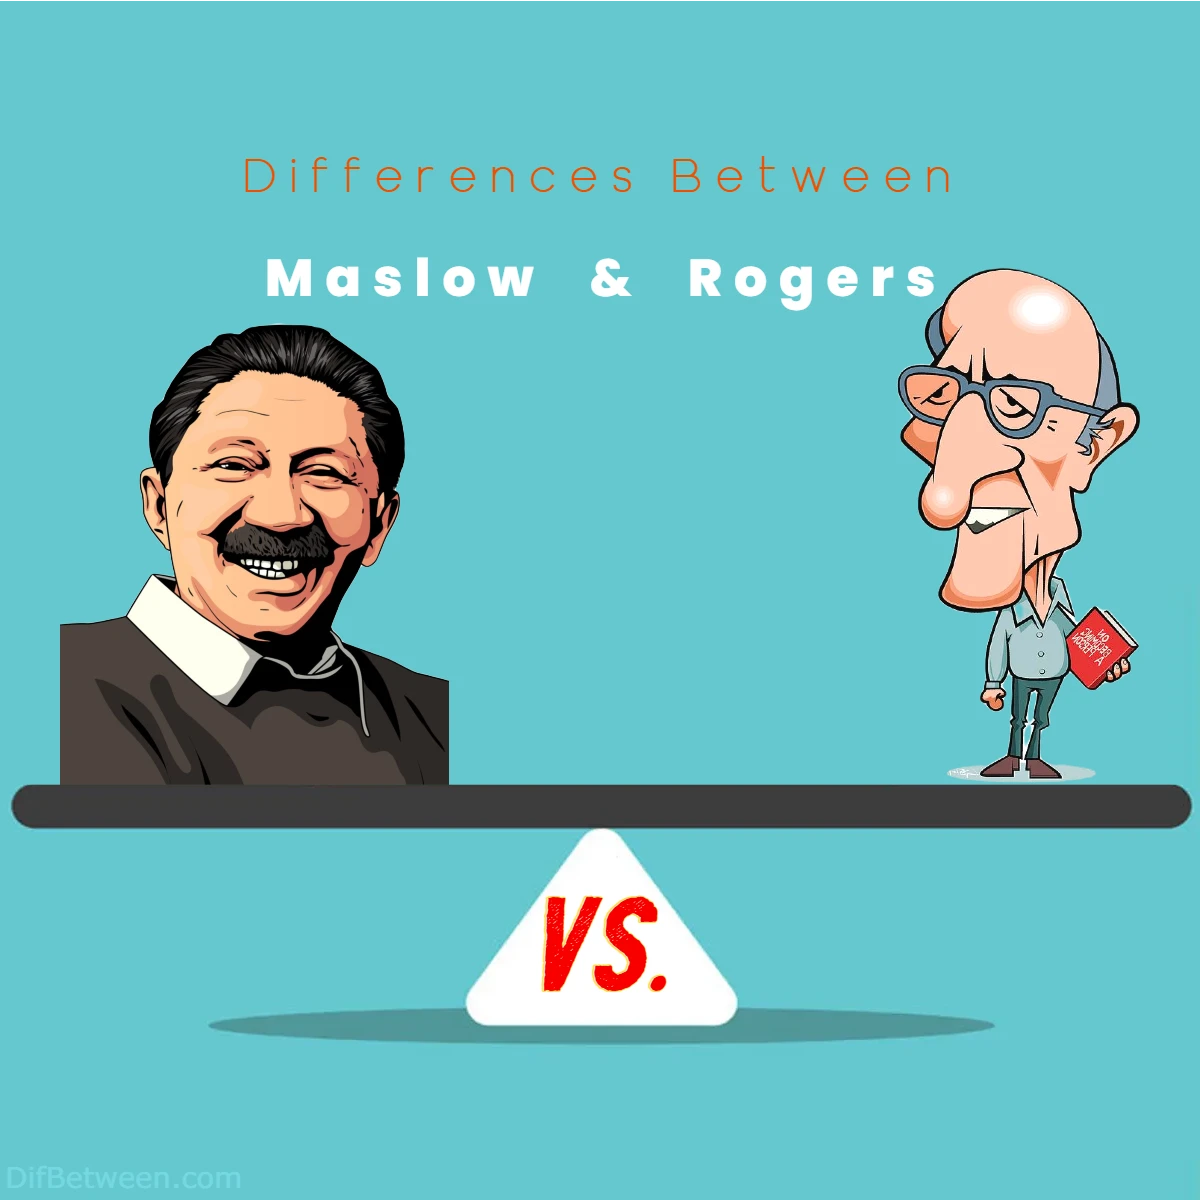 Differences Between Maslow vs Rogers